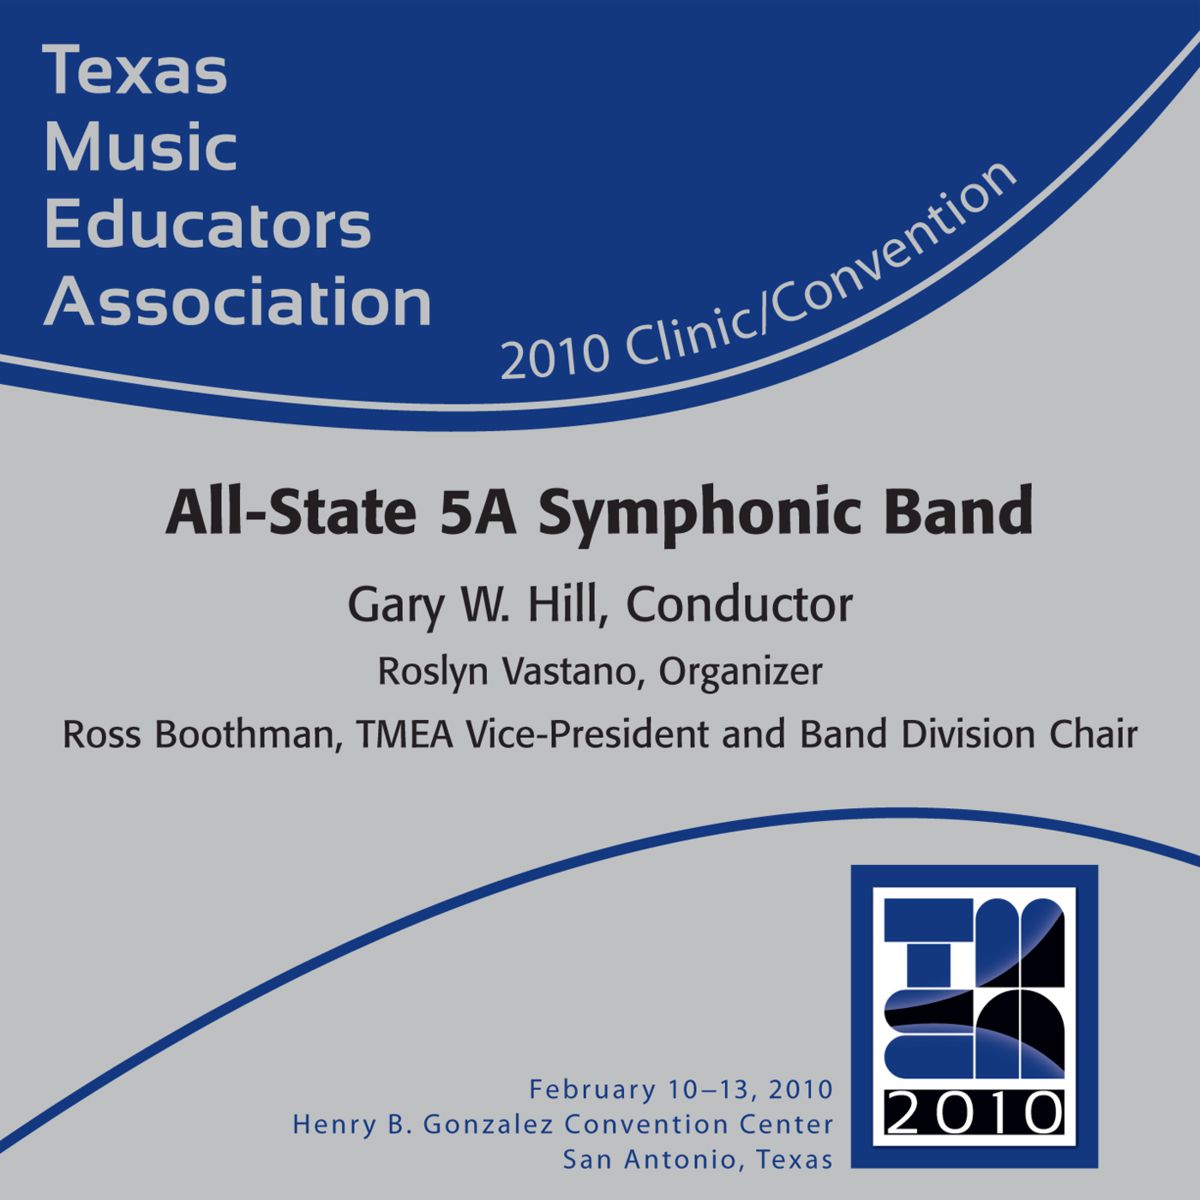 2010 Texas Music Educators Association: All-State 5A Smphonic Band - click here